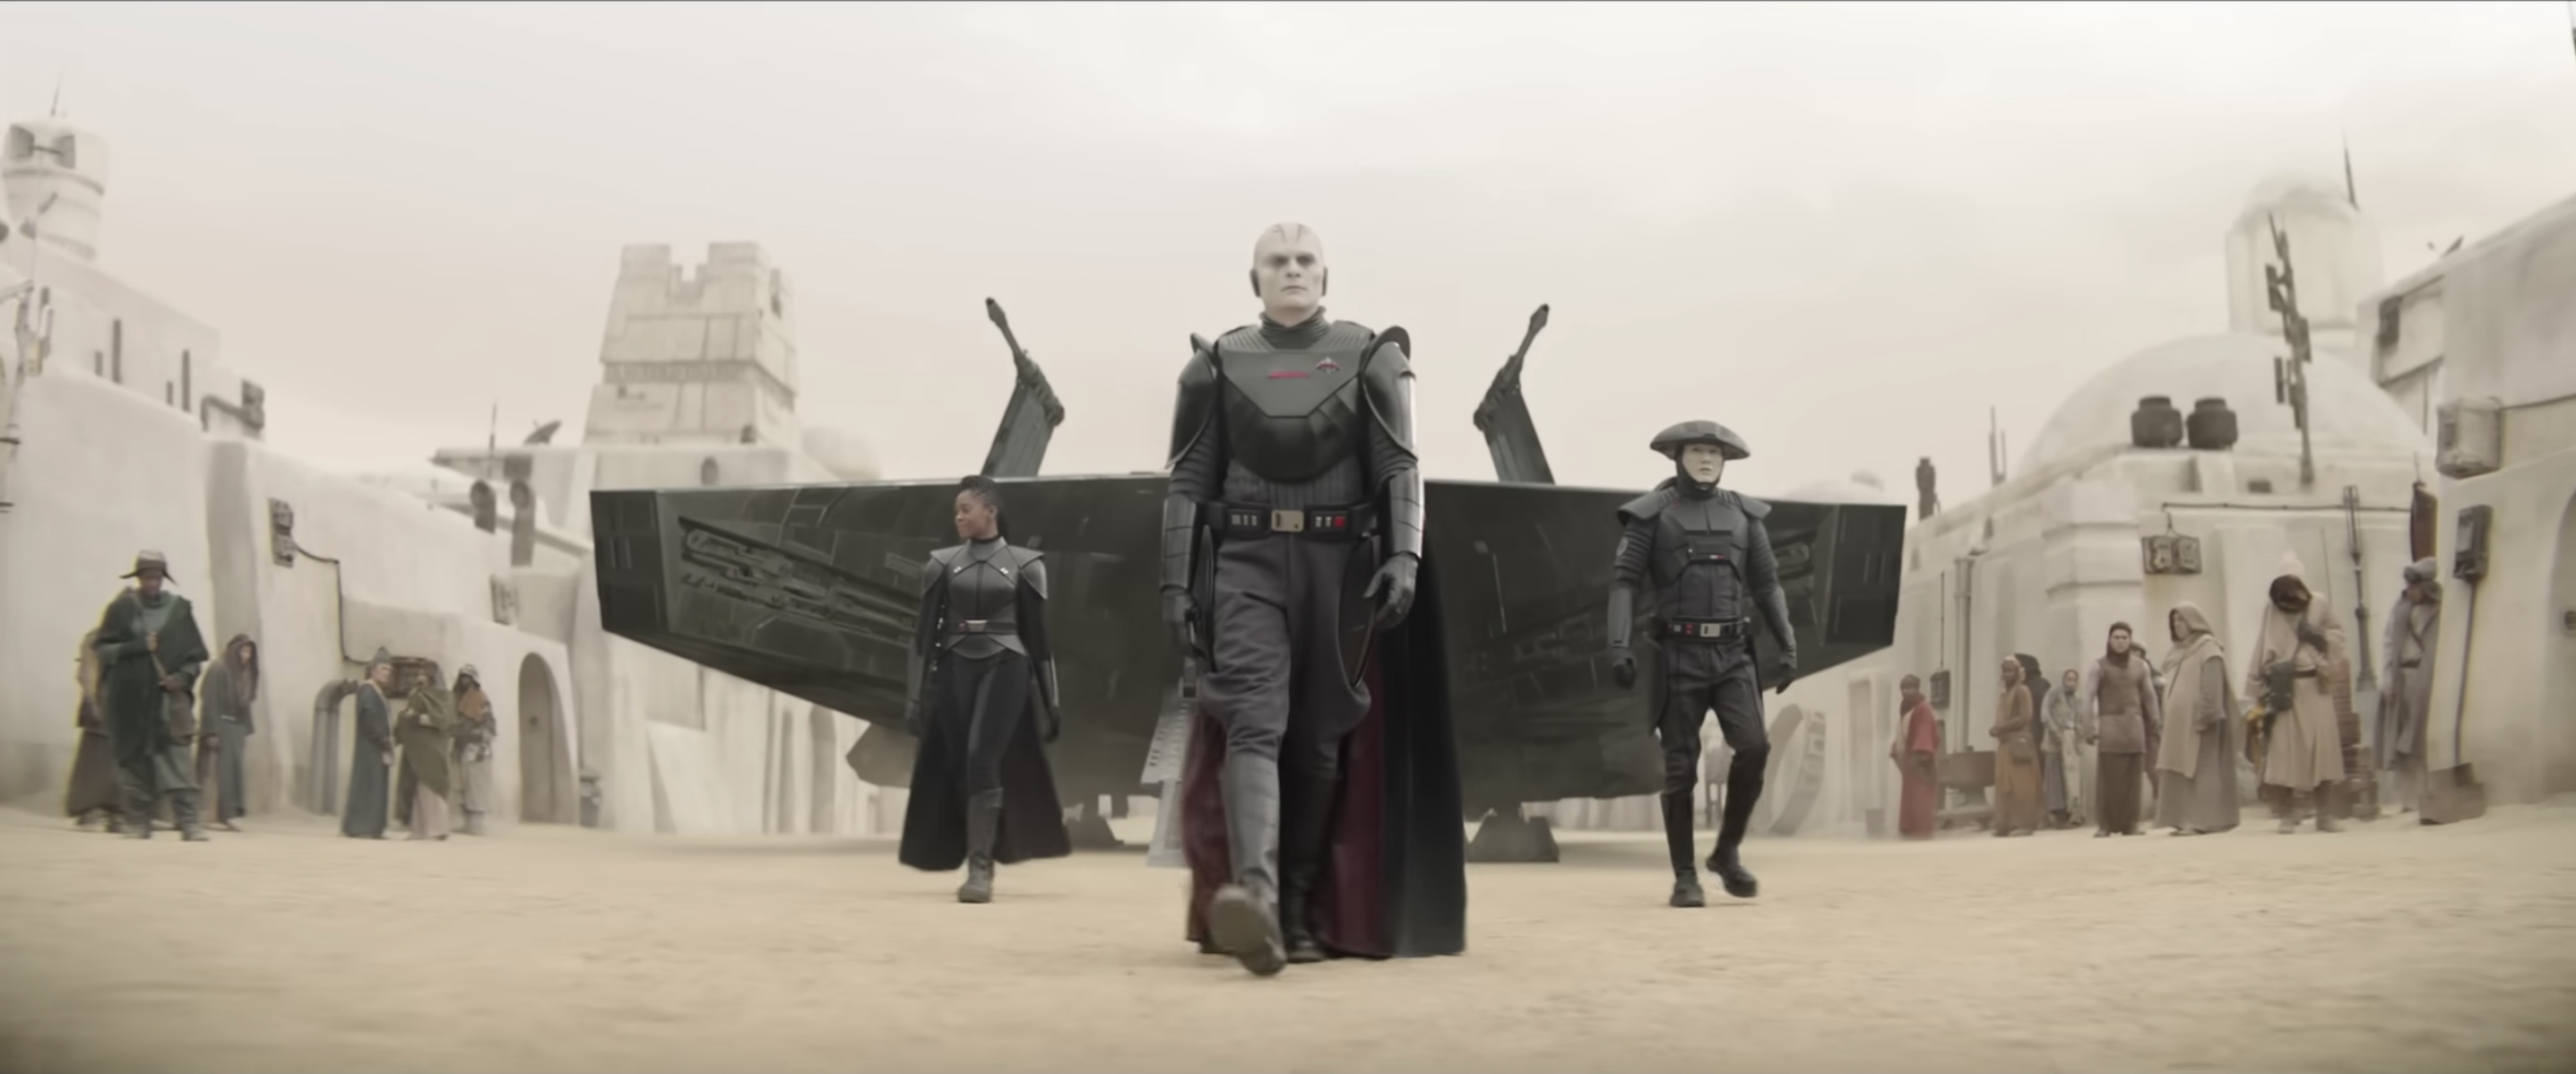 Rupert Friend as The Grand Inquisitor in Obi-Wan Kenobi, marching outside of a ship alongside Fifth Brother and Third Sister